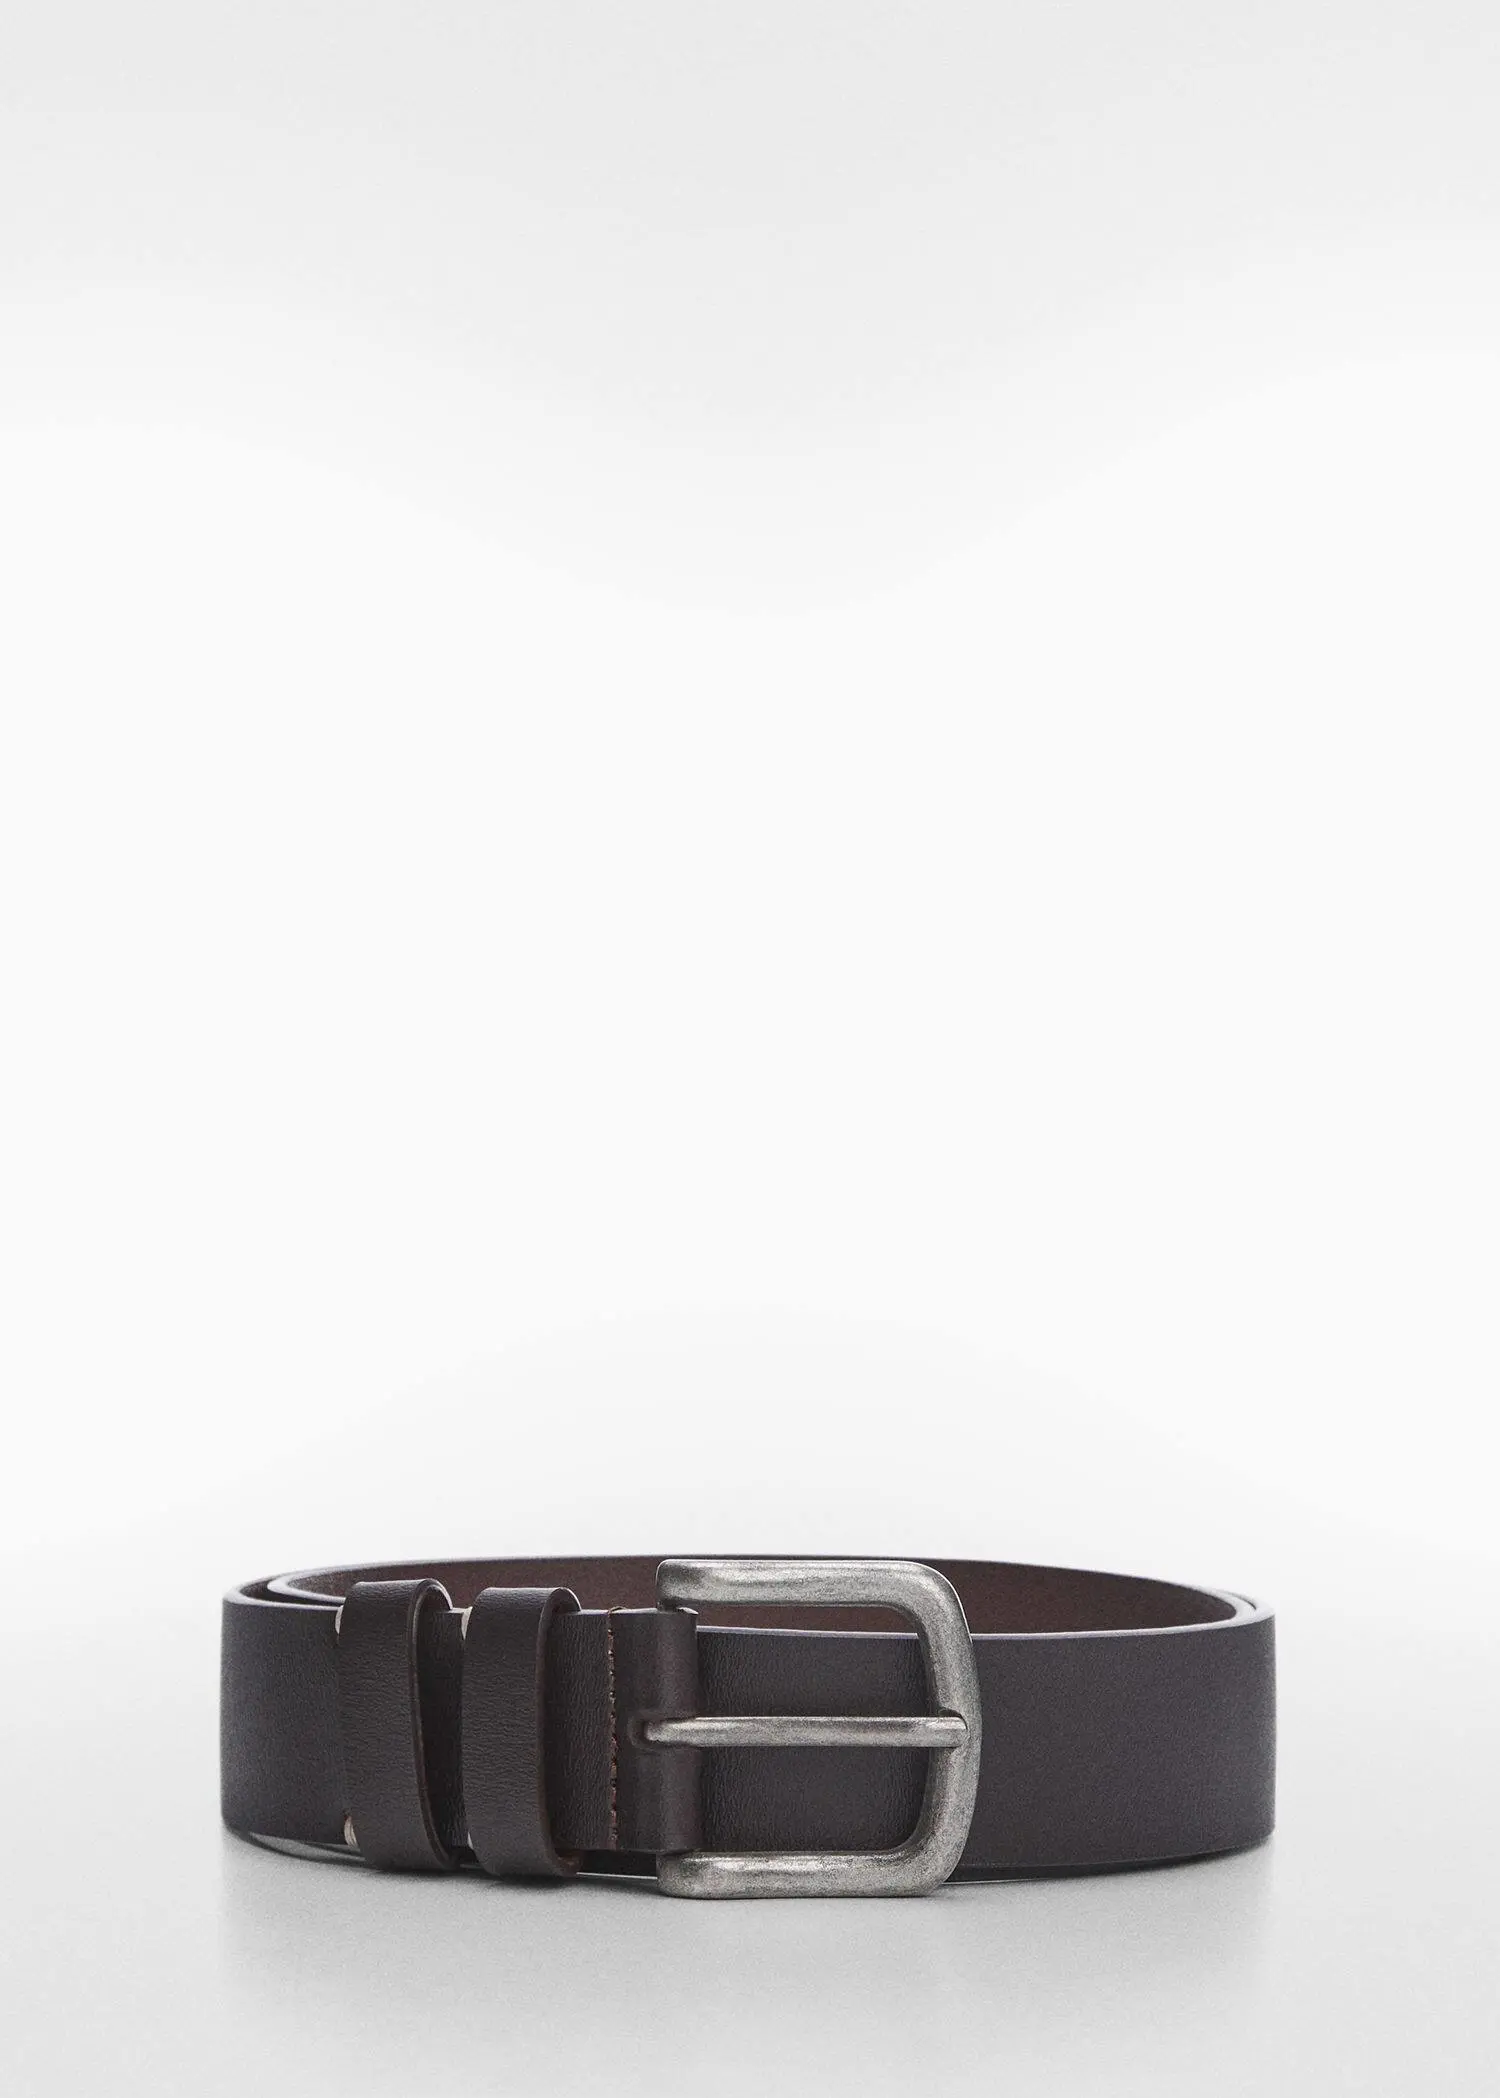 Mango Buckle leather belt. a brown leather belt with a silver buckle. 